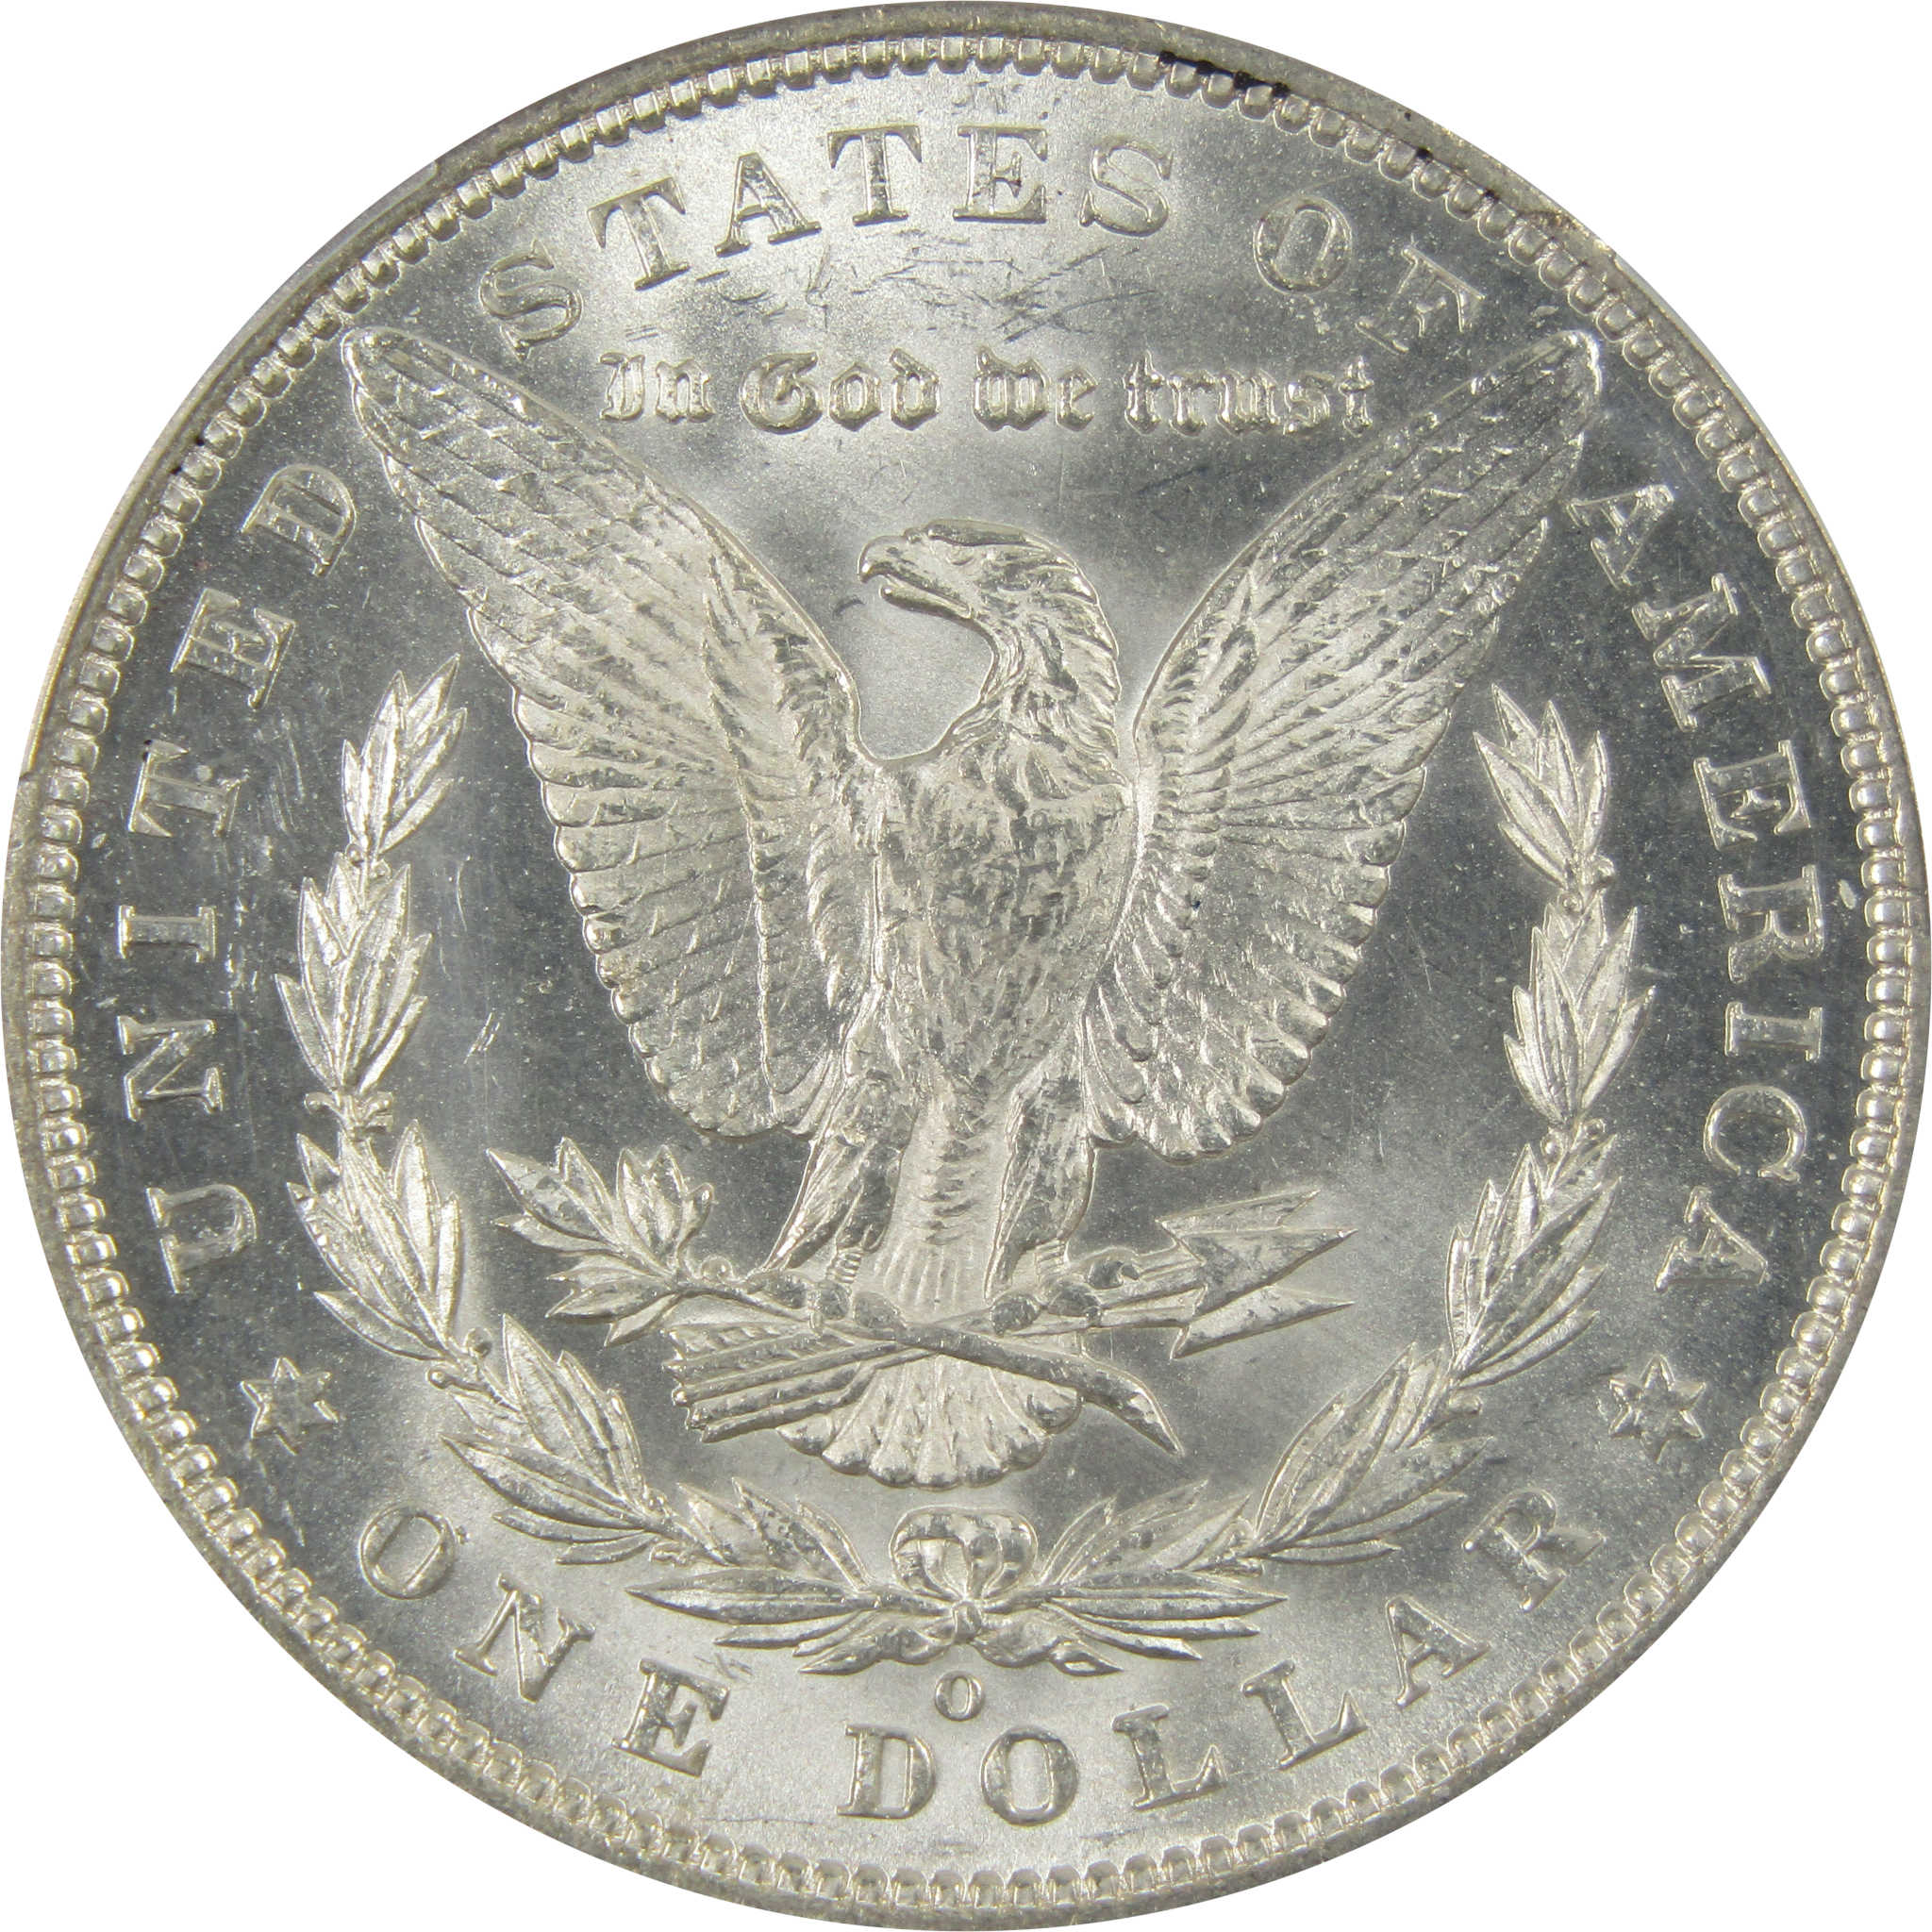 1892 O Morgan Dollar MS 62 PCGS 90% Silver $1 Uncirculated SKU:I7045 - Morgan coin - Morgan silver dollar - Morgan silver dollar for sale - Profile Coins &amp; Collectibles